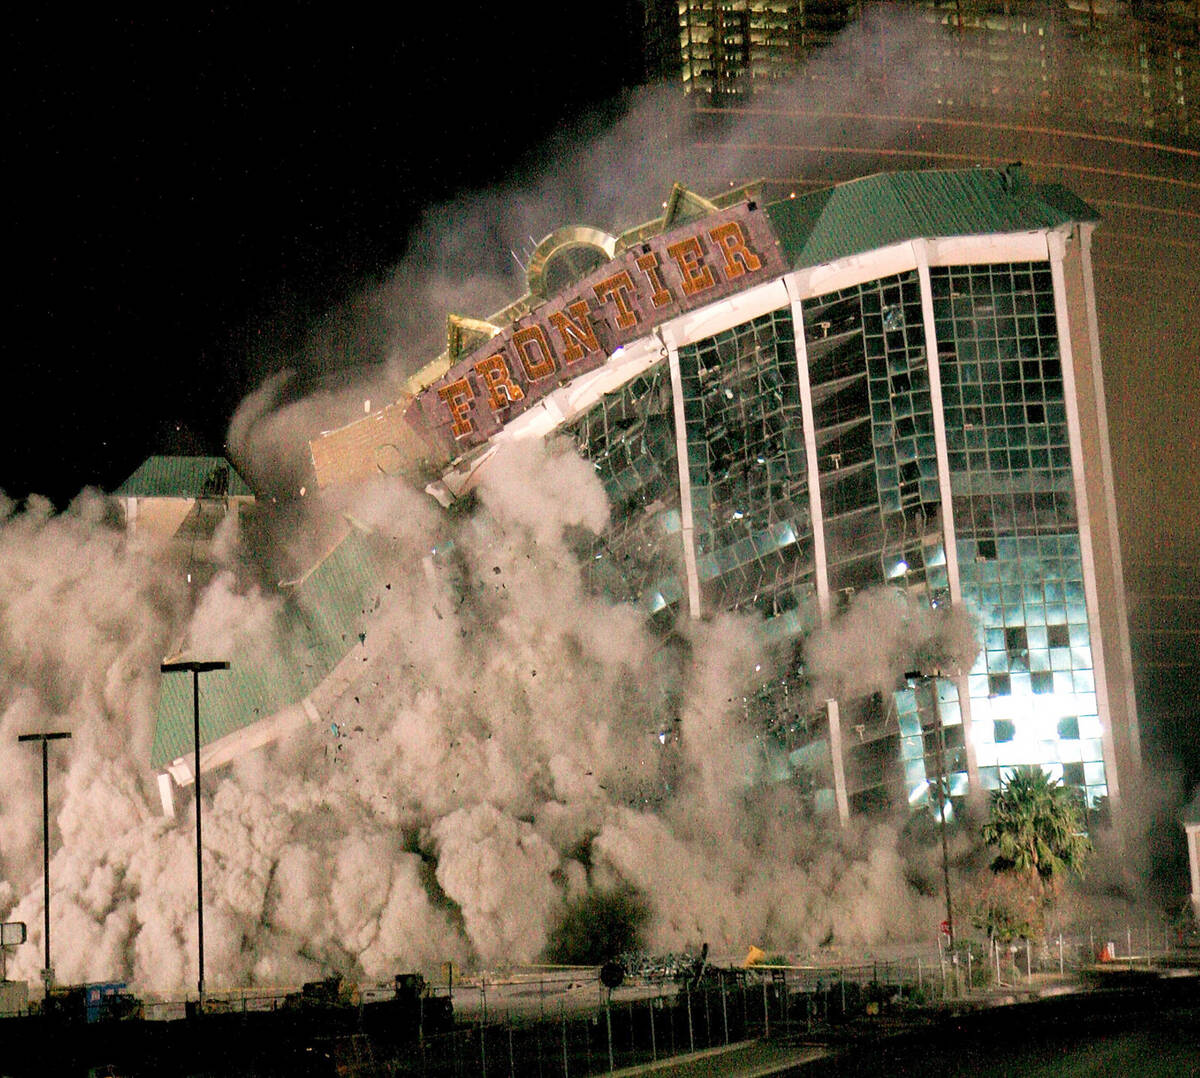 The New Frontier was imploded Nov. 13, 2007, to make way for a hotel that would resemble New Yo ...